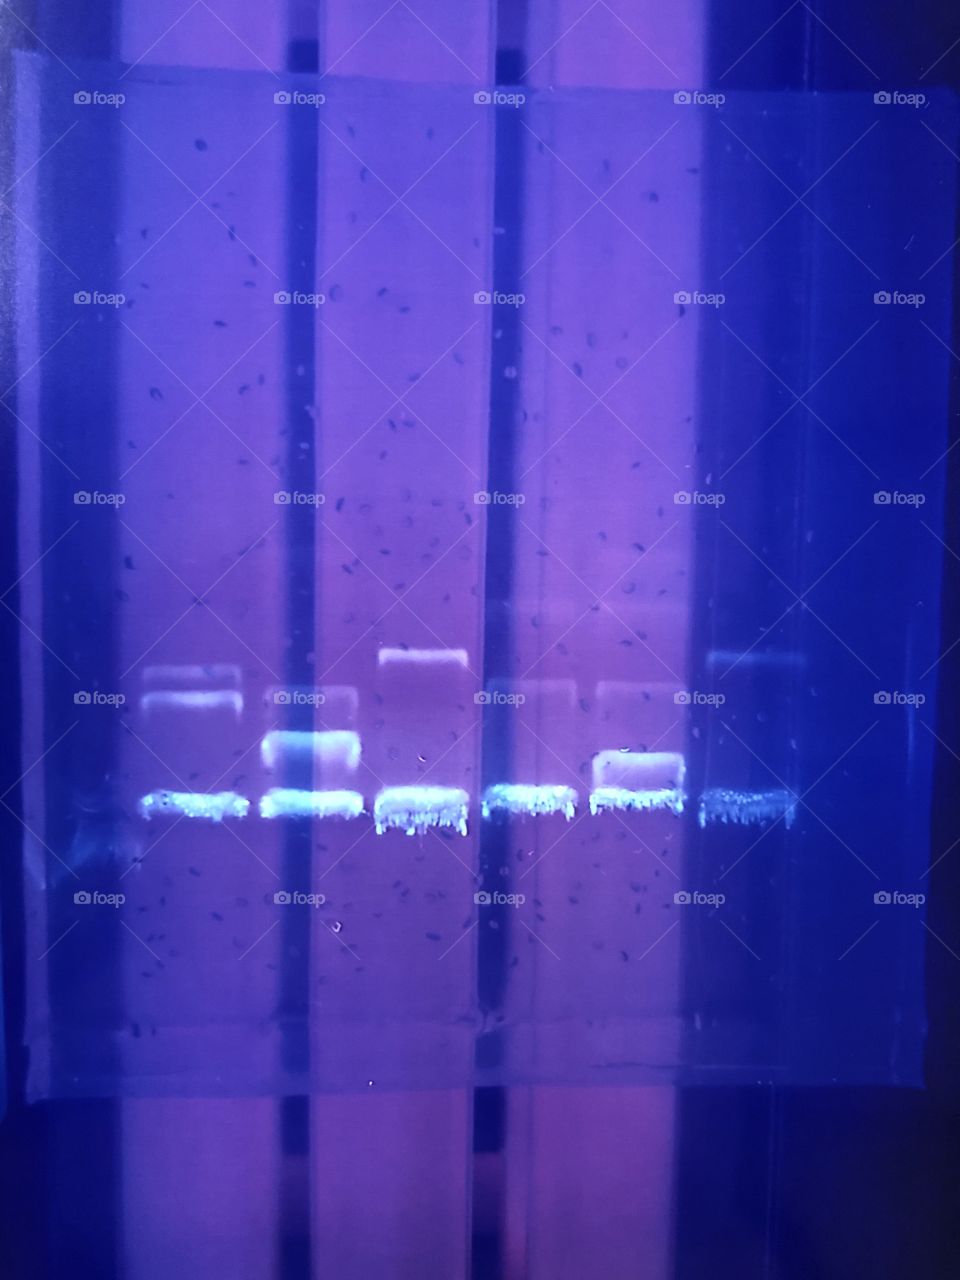 This is an electrophoresis gel with DNA and a marker. This is the process used for finding out who committed a crime by analyzing whether their DNA matches with the marker( the marker would be something they touched or a blood sample) 